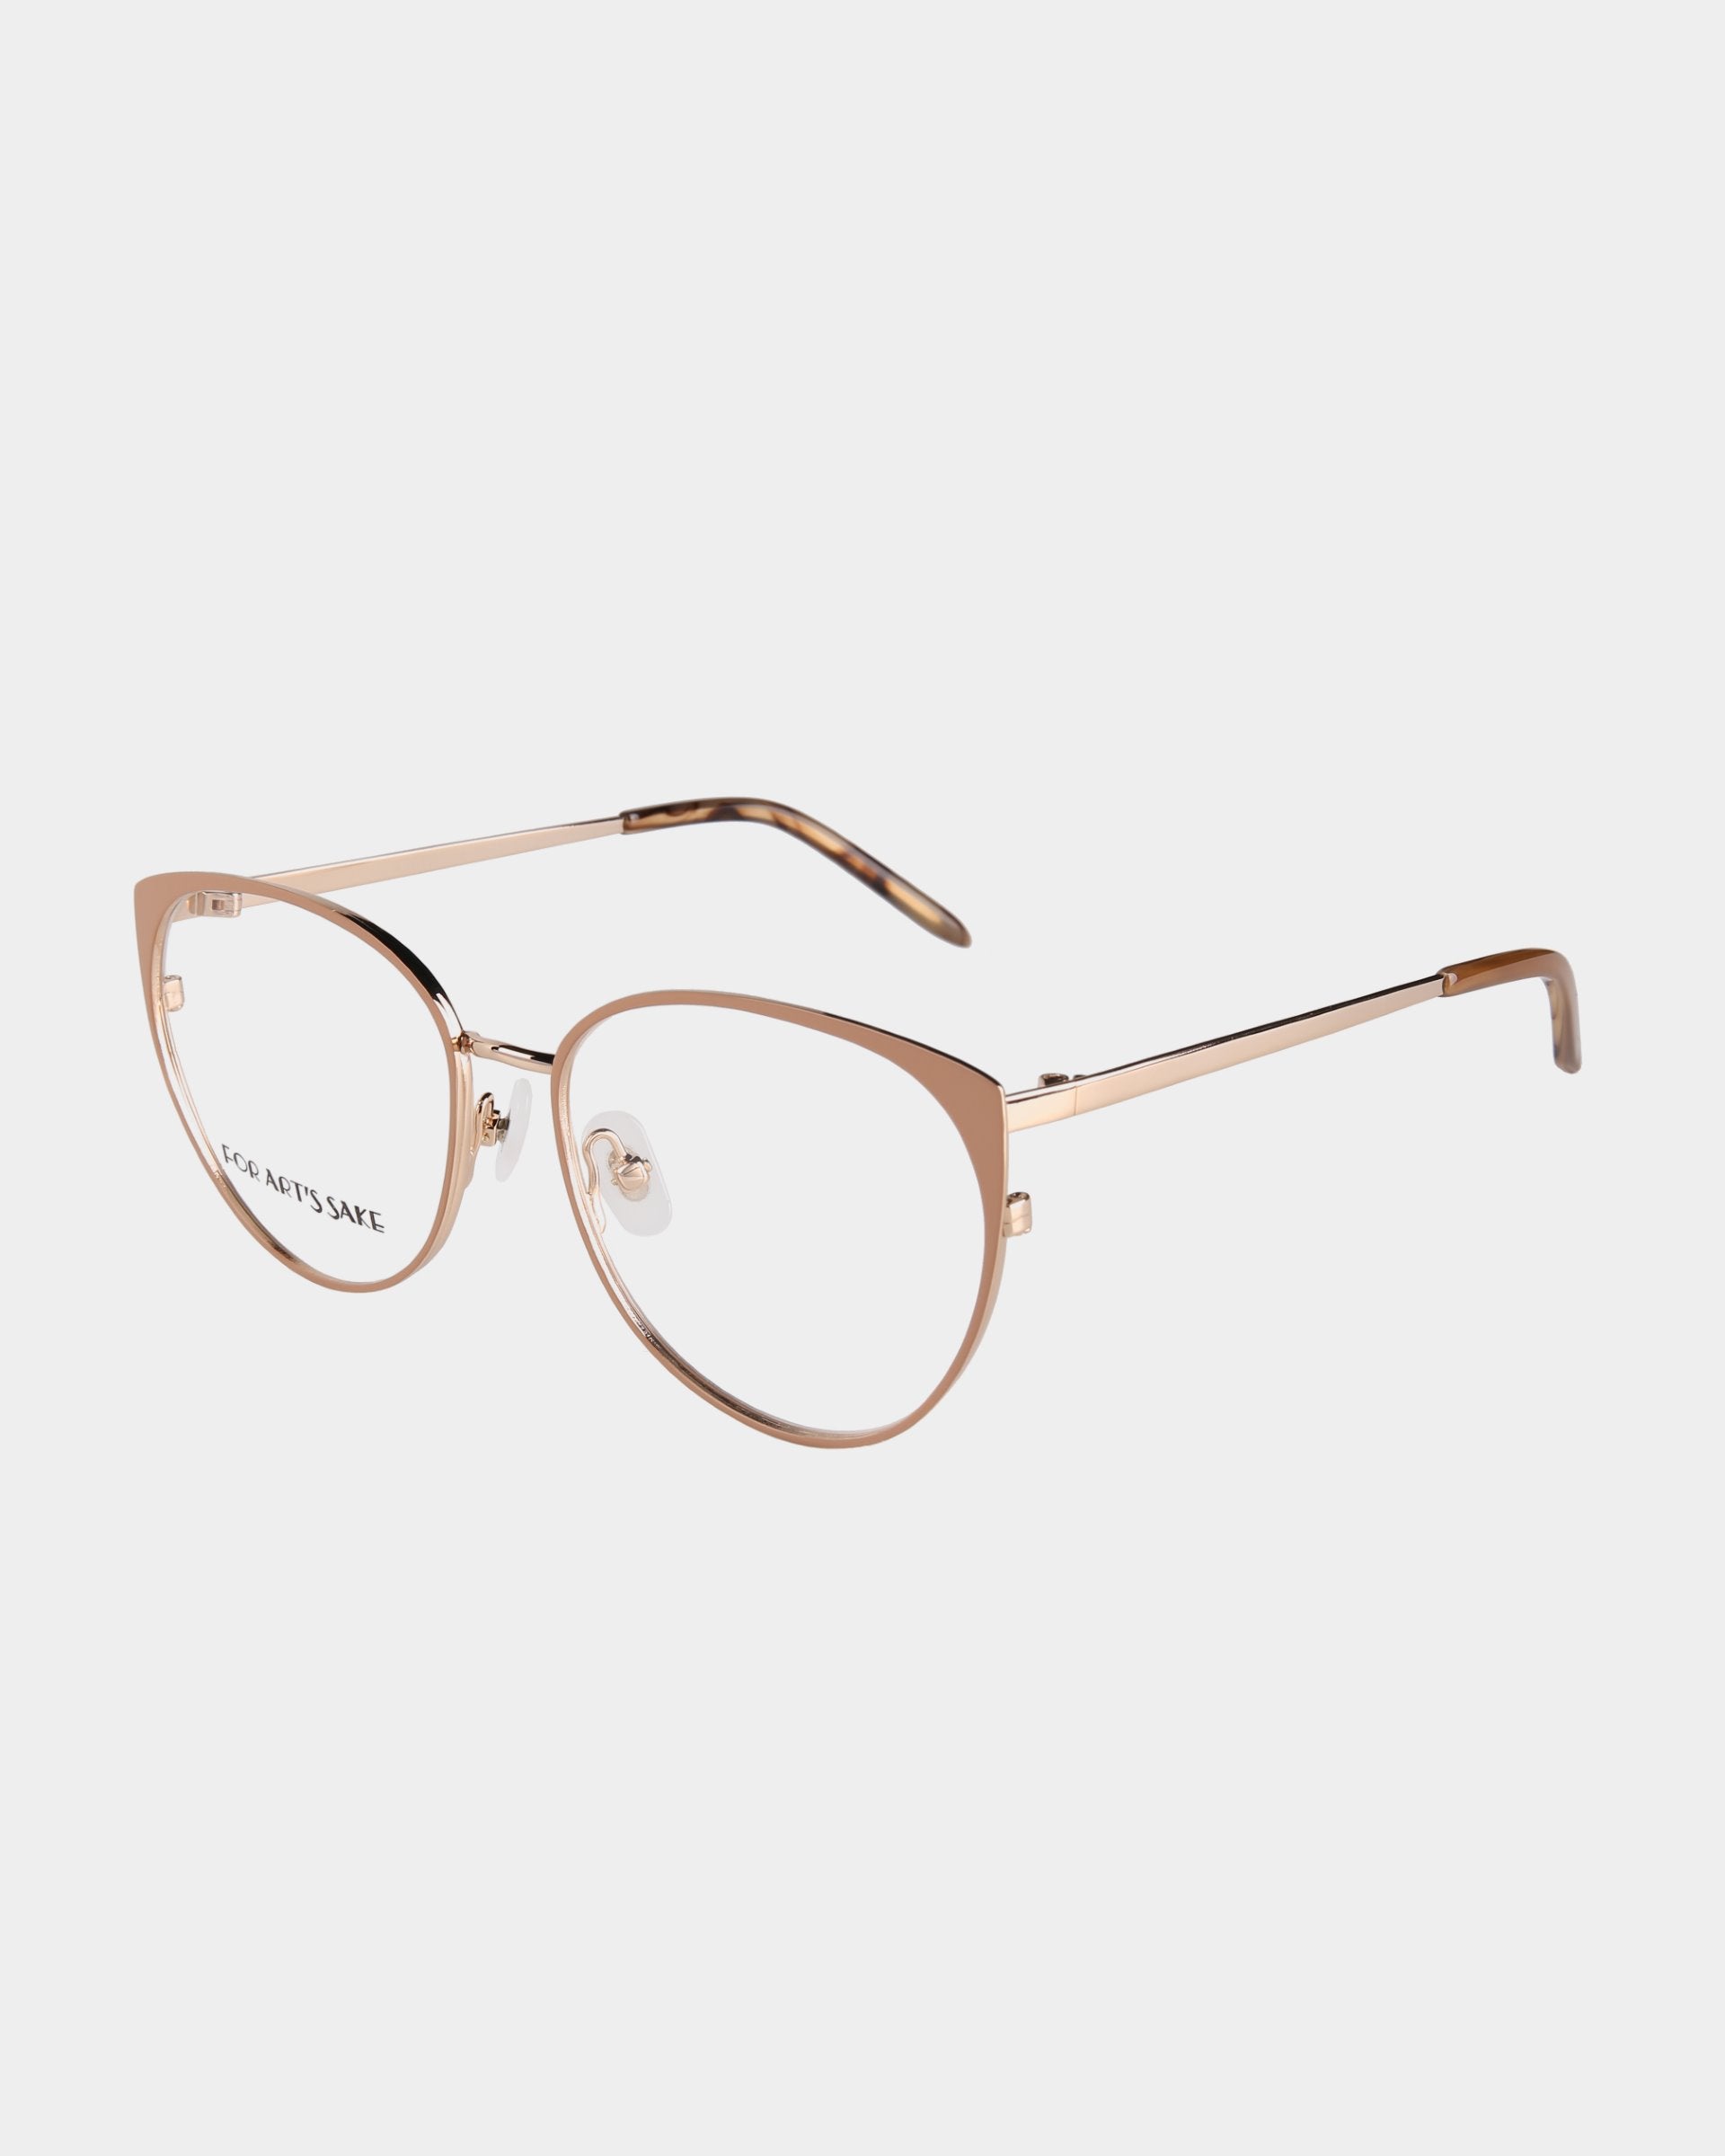 A pair of elegant, rose gold eyeglasses with a sleek and modern cat-eye frame design. Featuring 18-karat gold plating, the Kaia glasses by For Art's Sake® have thin metal arms and clear lenses, suitable for both fashion and functionality. The lightweight frame includes subtle, stylish detailing.